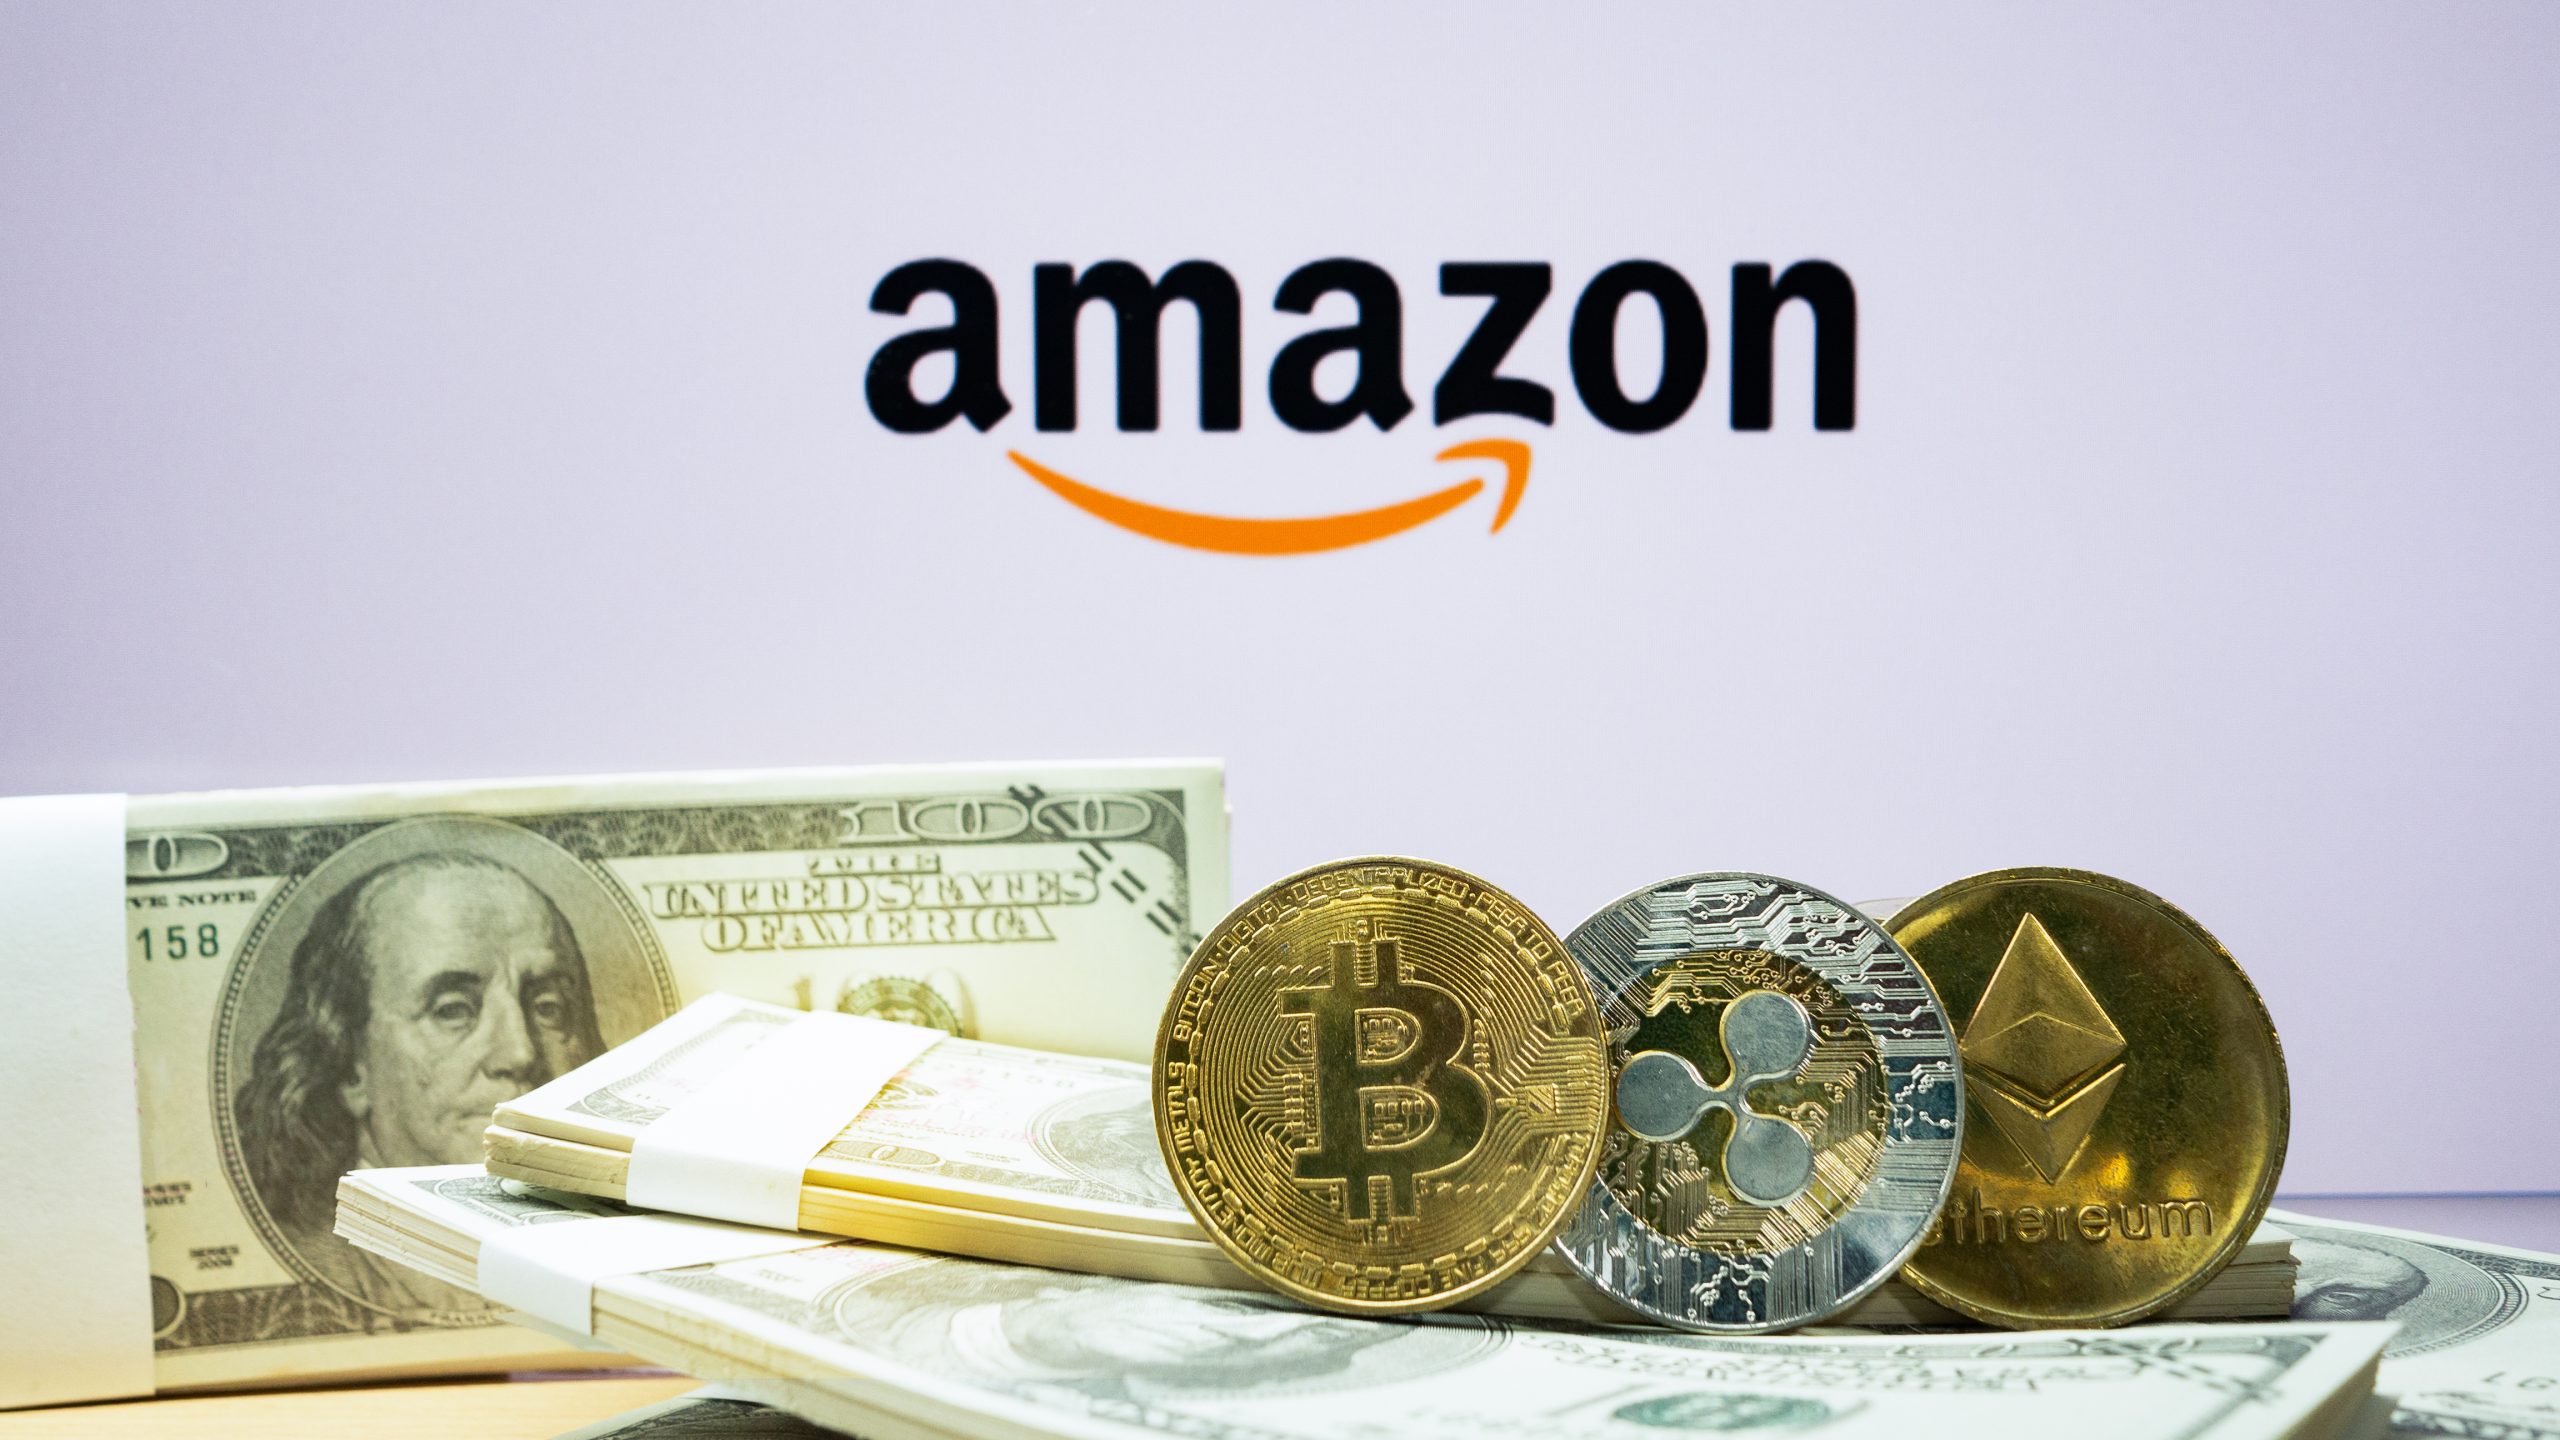 Filecoin Emerges as Decentralized Competitor to Amazon Web Services (AWS)